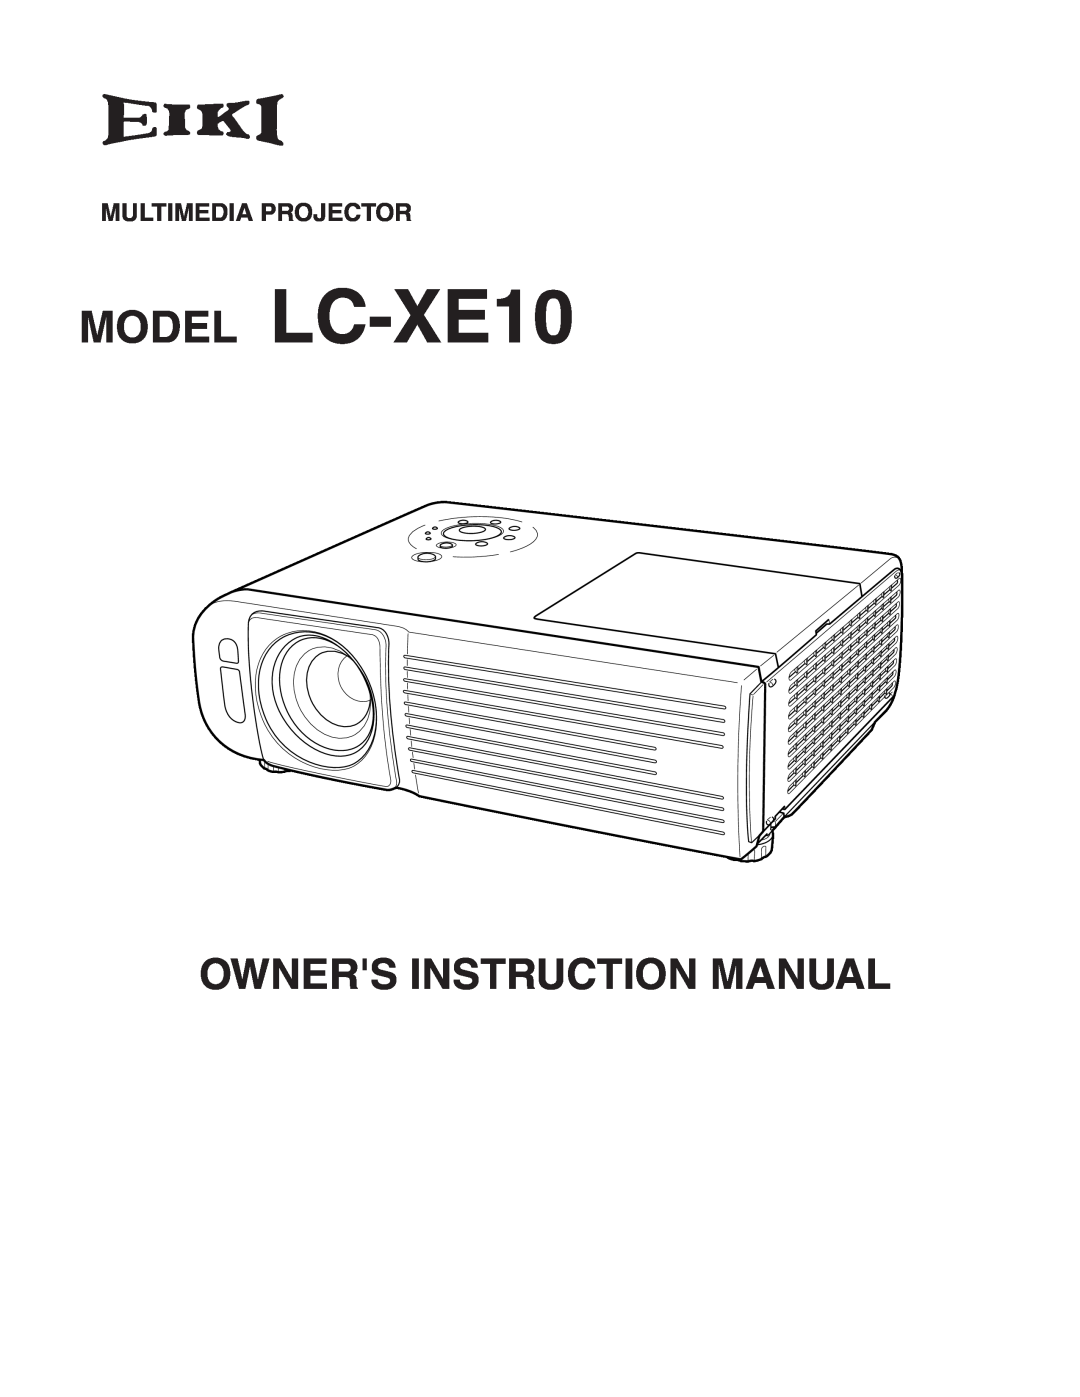 Eiki instruction manual MODEL LC-XE10, Owners Instruction Manual, Multimedia Projector 